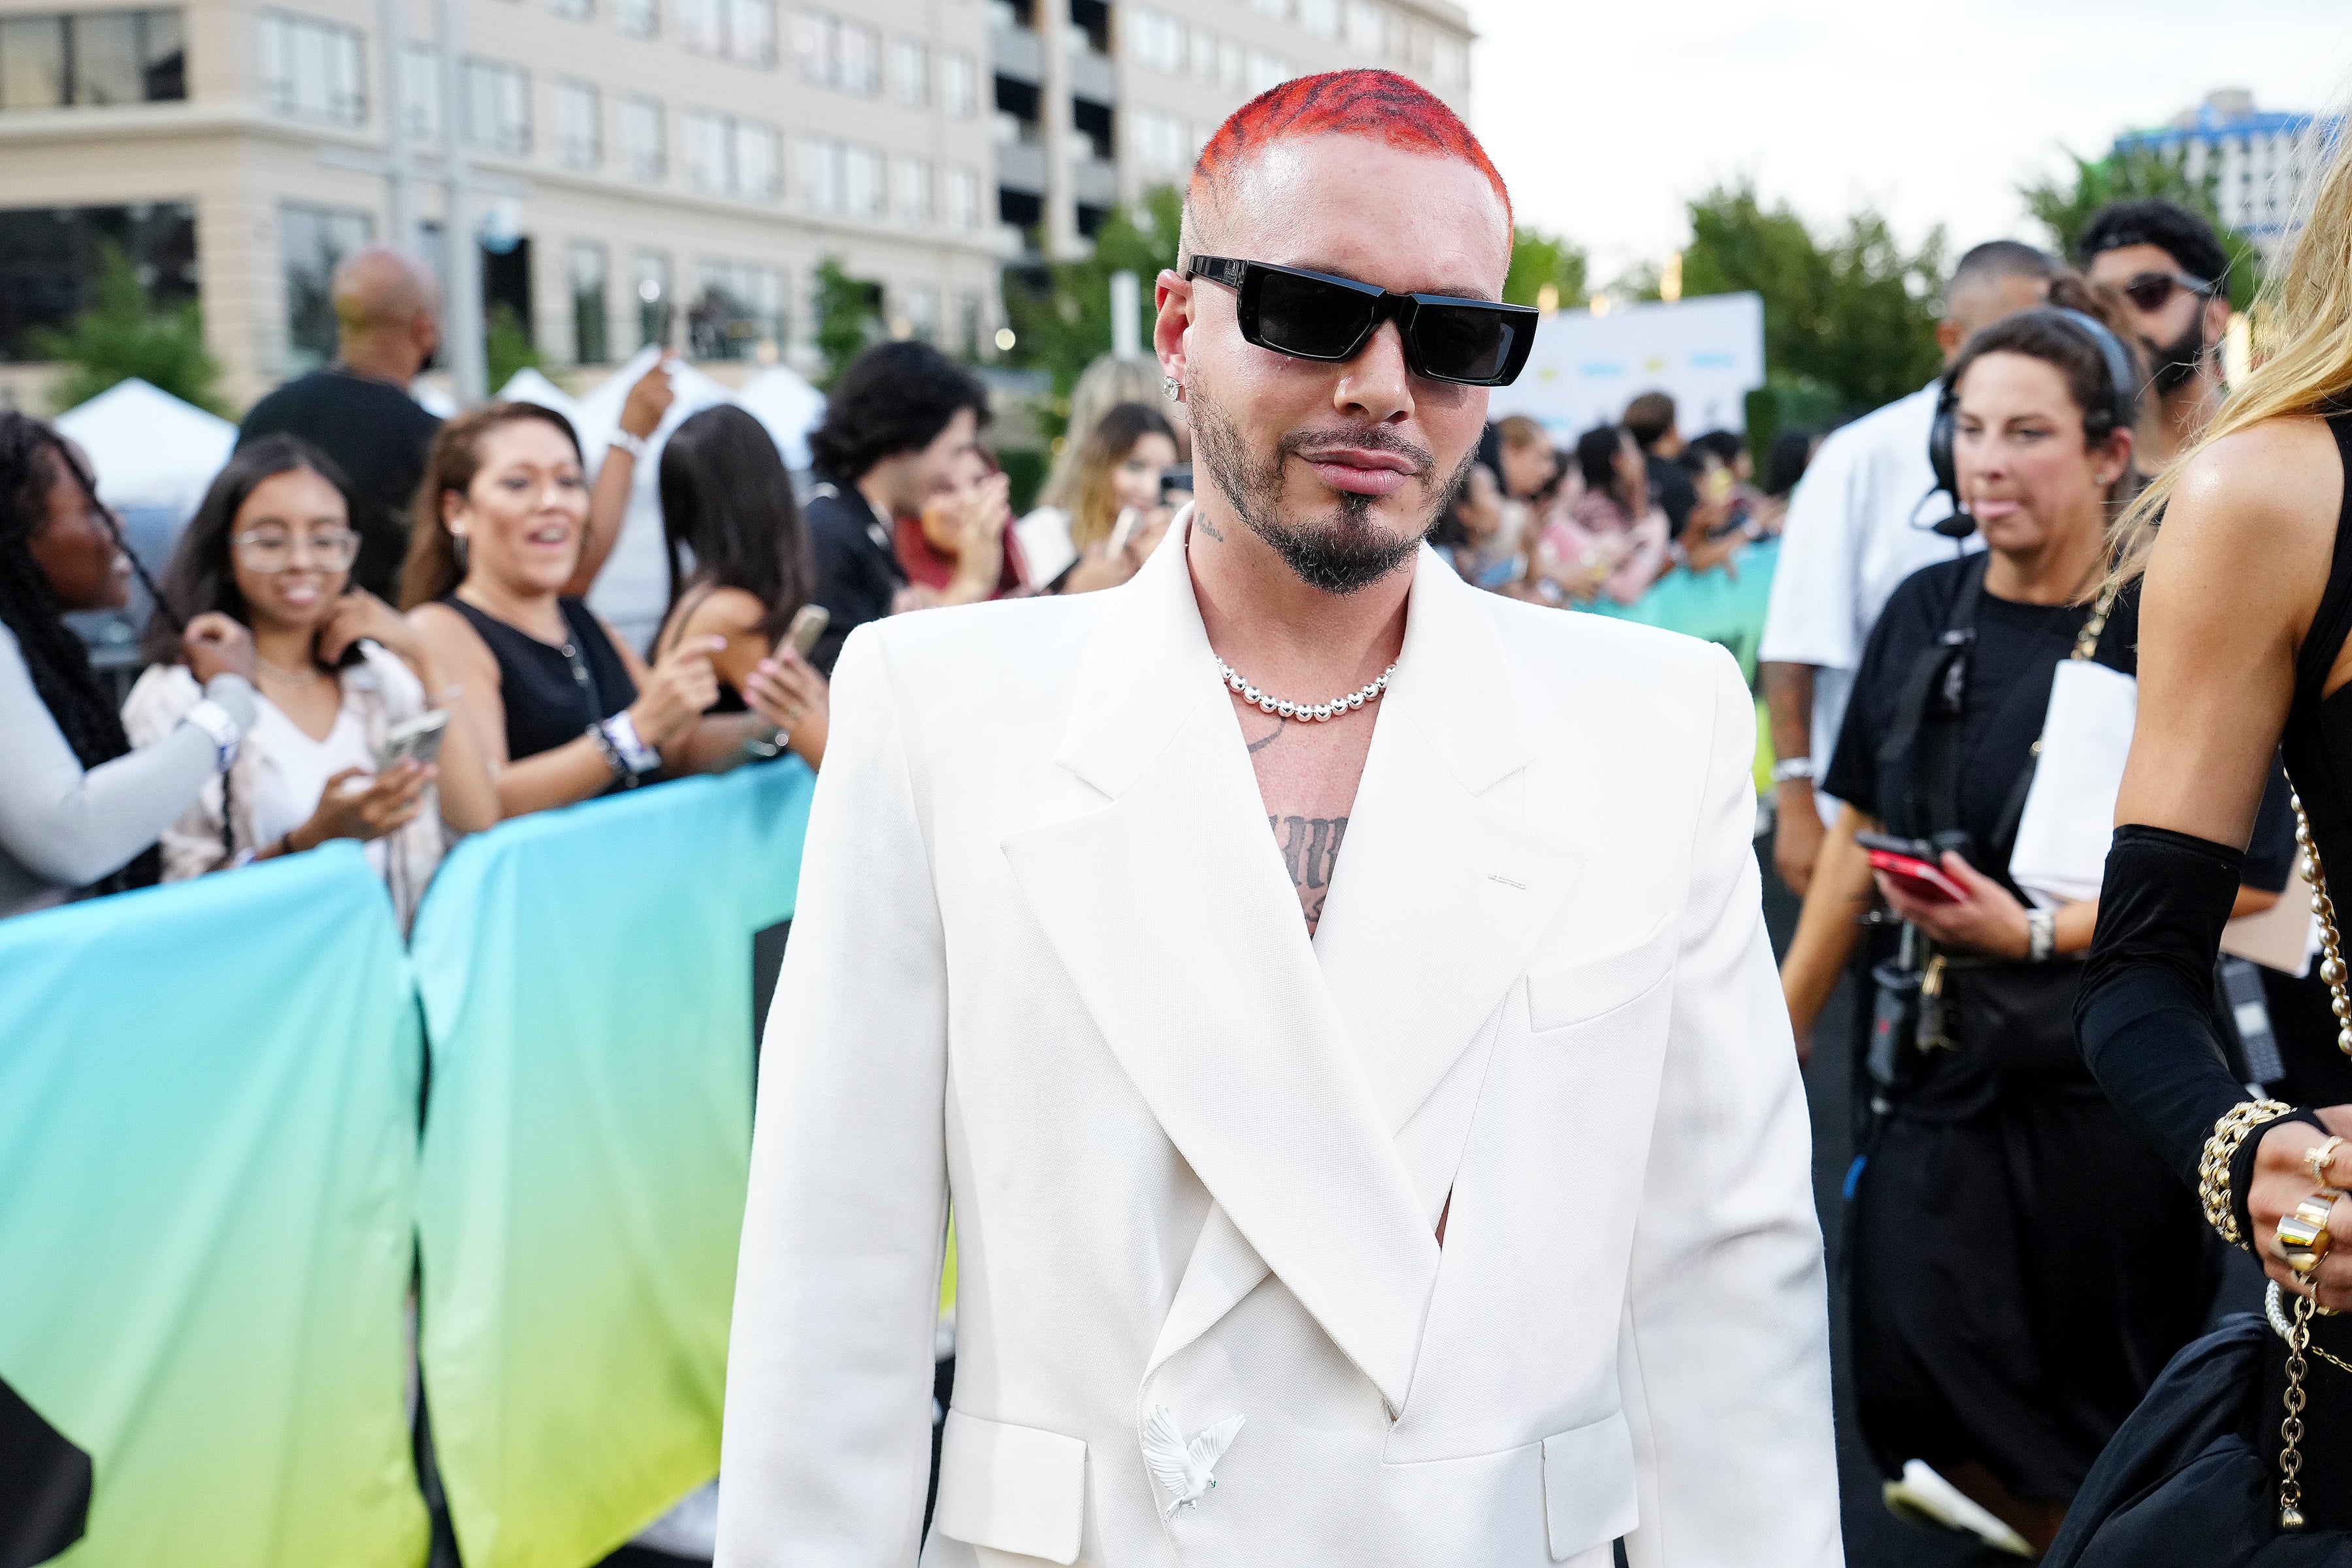 J Balvin Debuts Blue Hair Color With Red Heart at Grammys